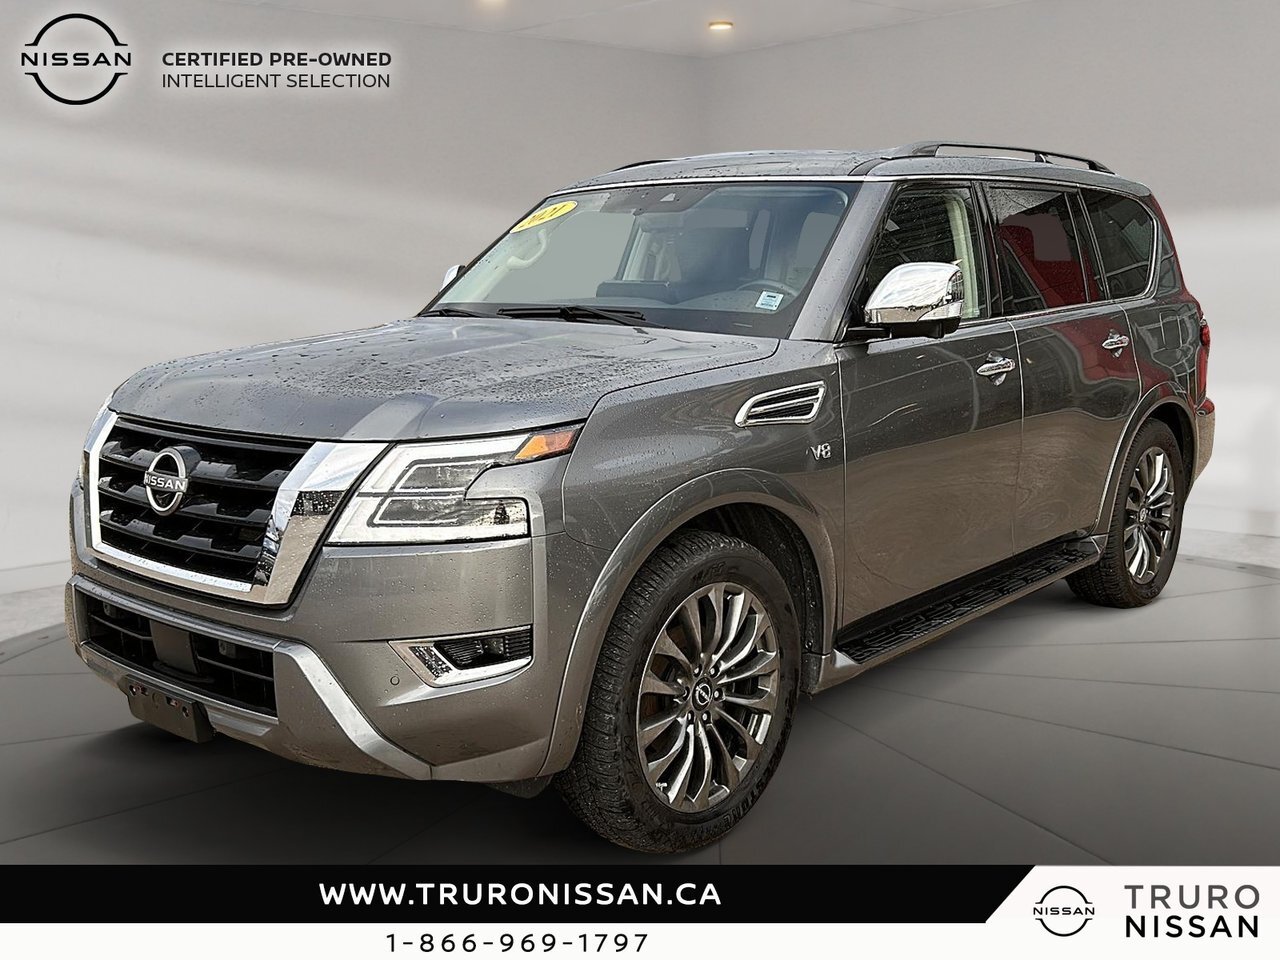 2021 Nissan Armada Platinum - Lease From $375BW Nissan CPO with Winte